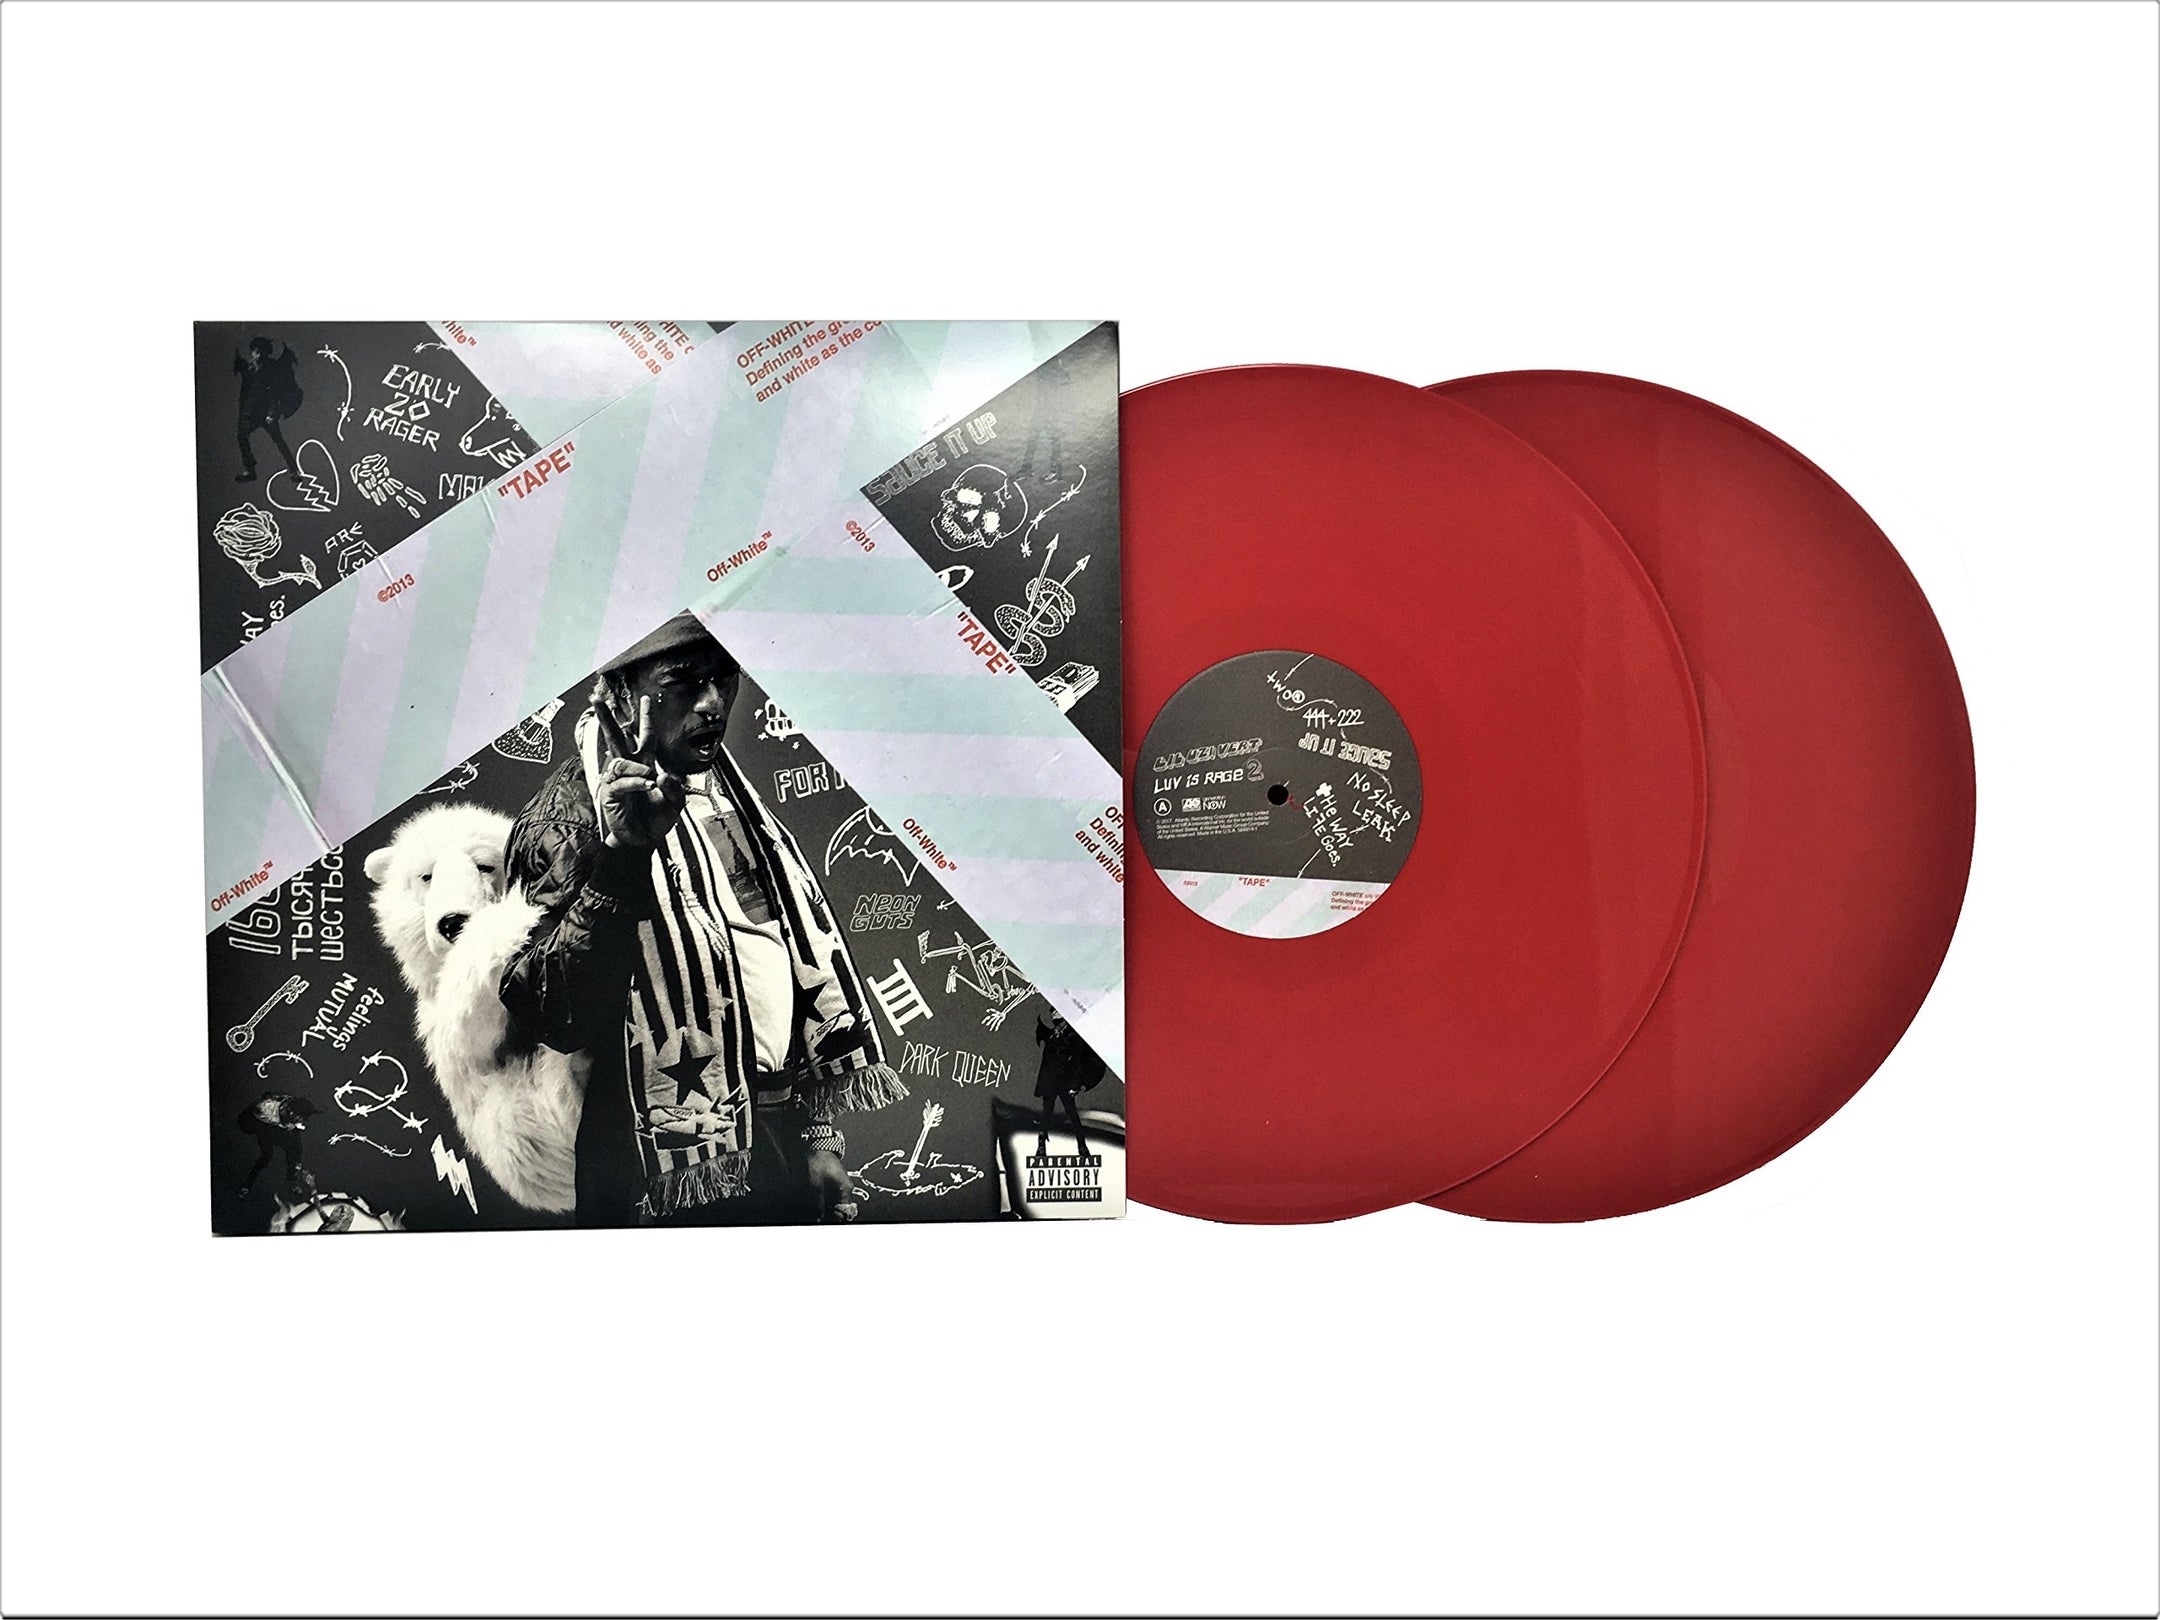 Lil Uzi Vert - Luv is Rage 2 (Limited Edition Red Colored Double LP ...